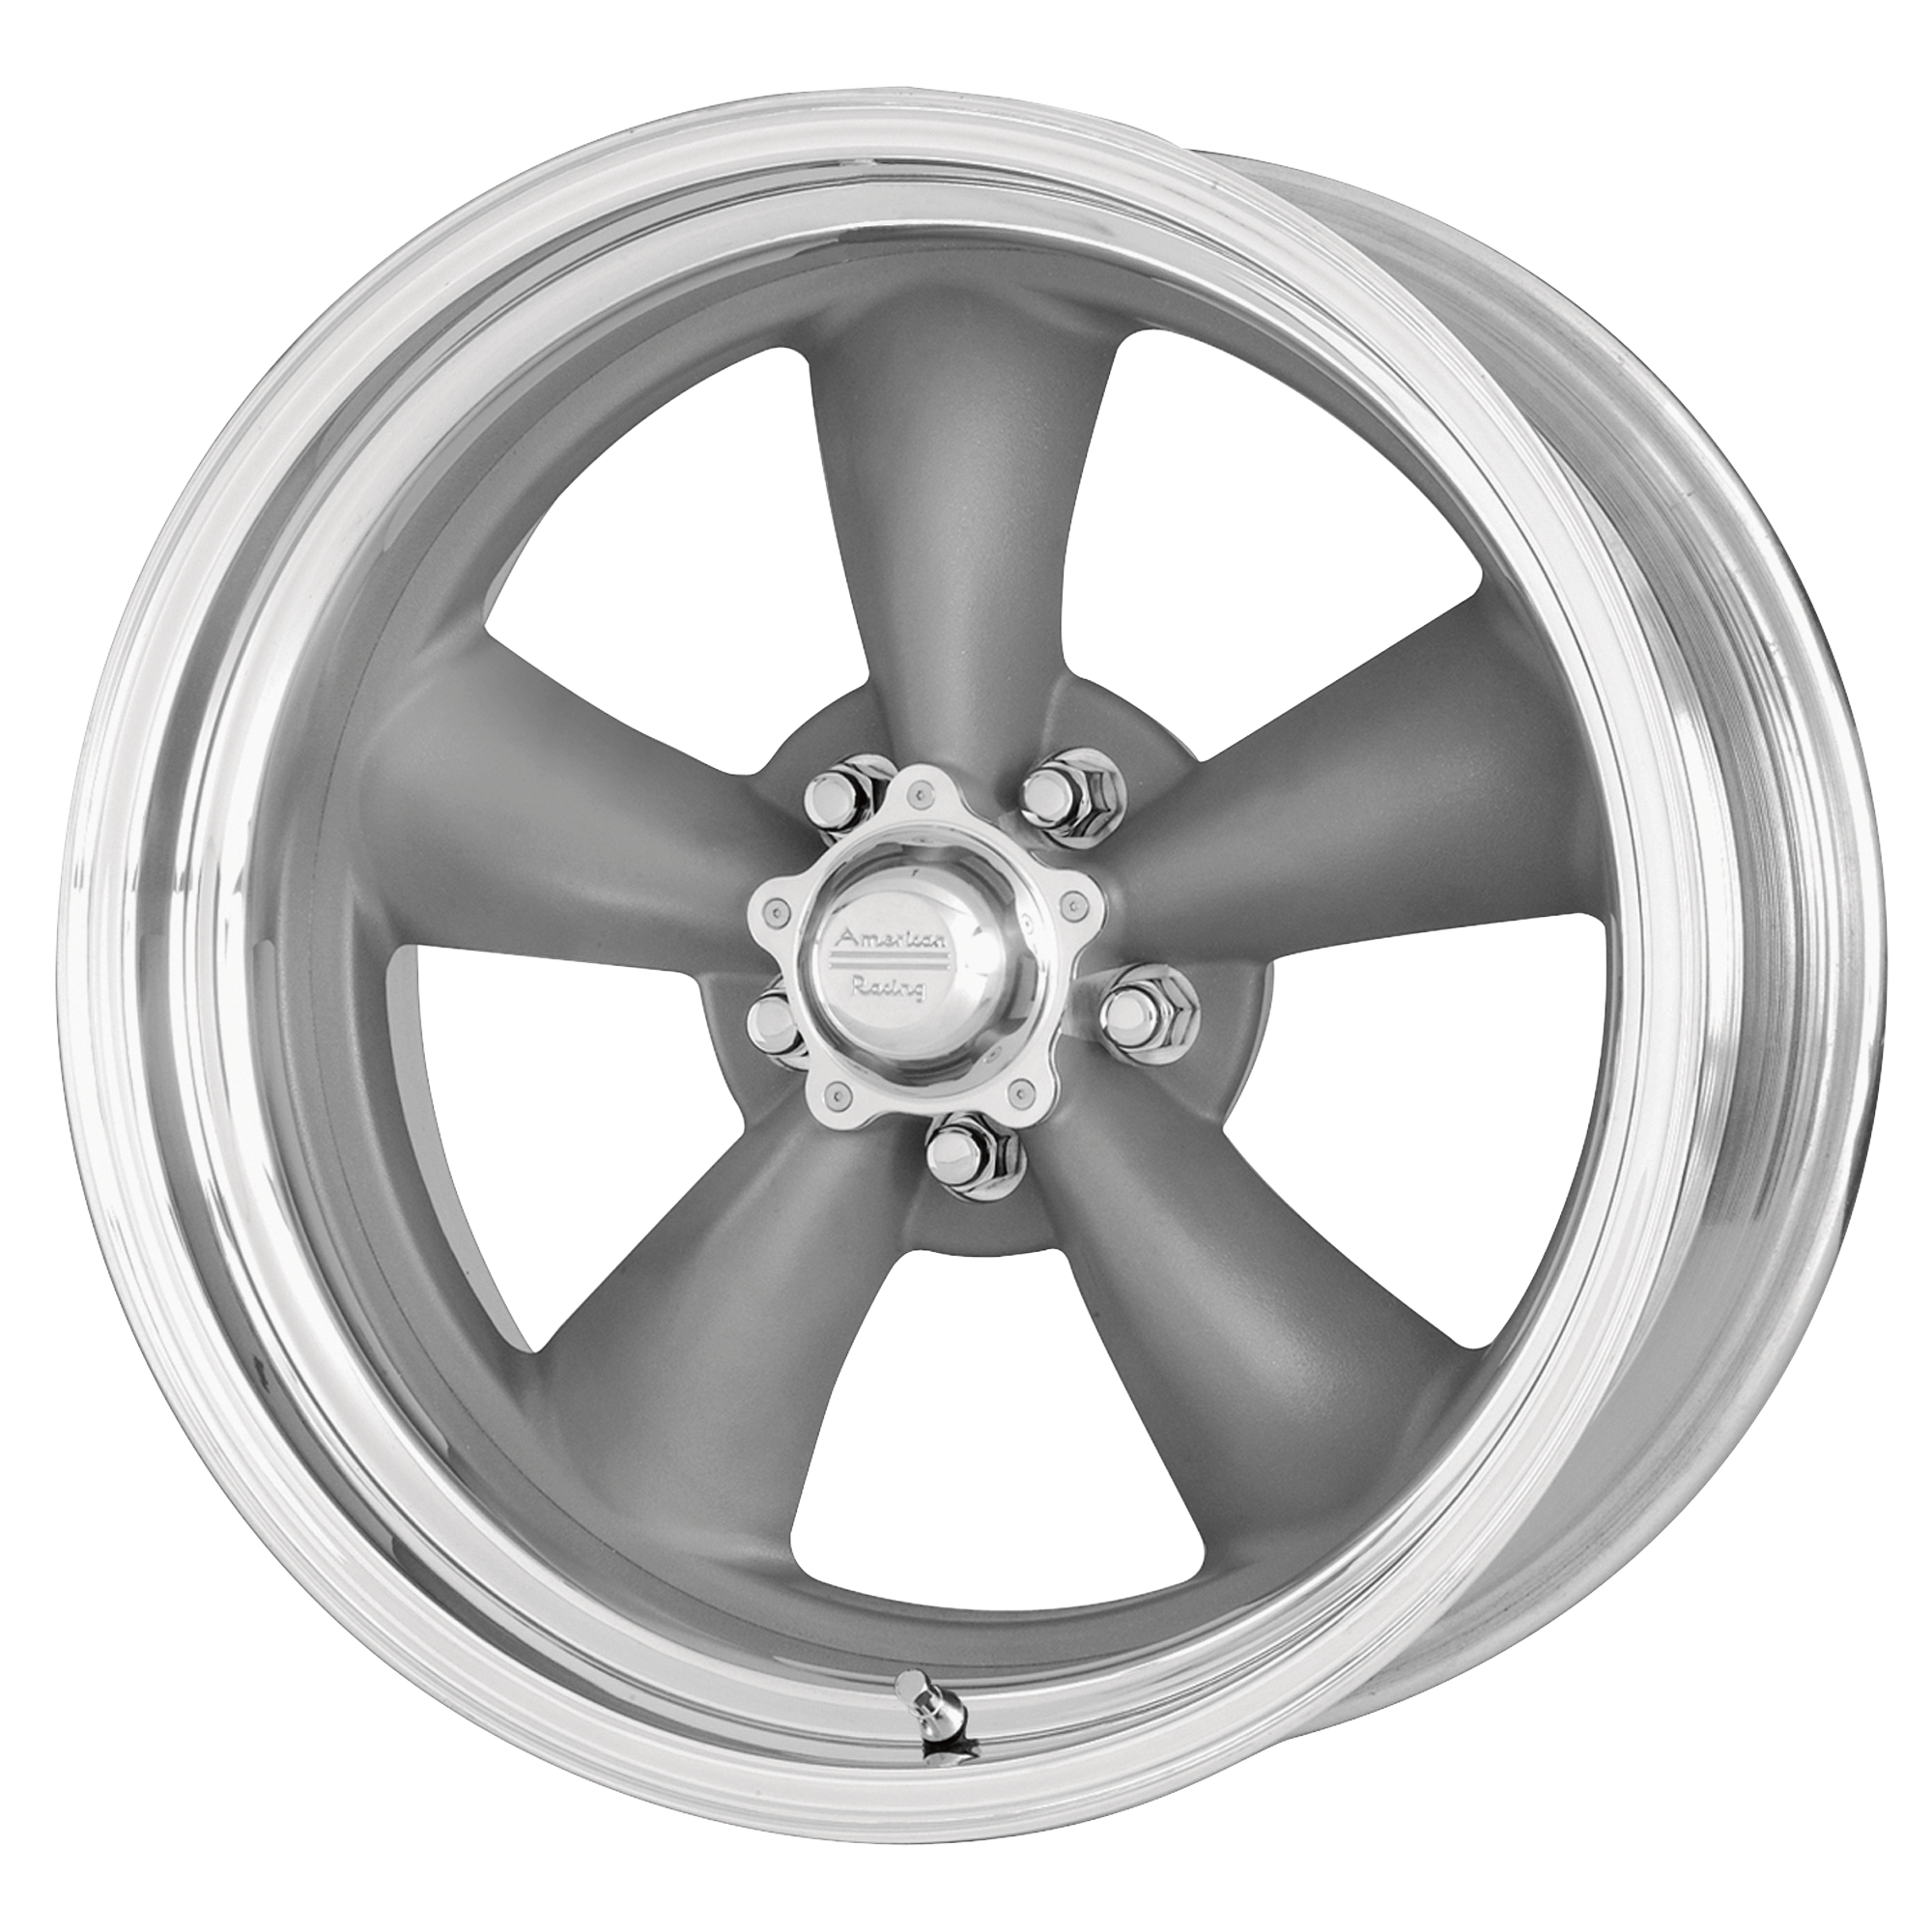 CLASSIC TORQ THRUST II ONE PIECE 17x8 5x120.65 MAG GRAY W/ MACHINED LIP (-11 mm) - Tires and Engine Performance